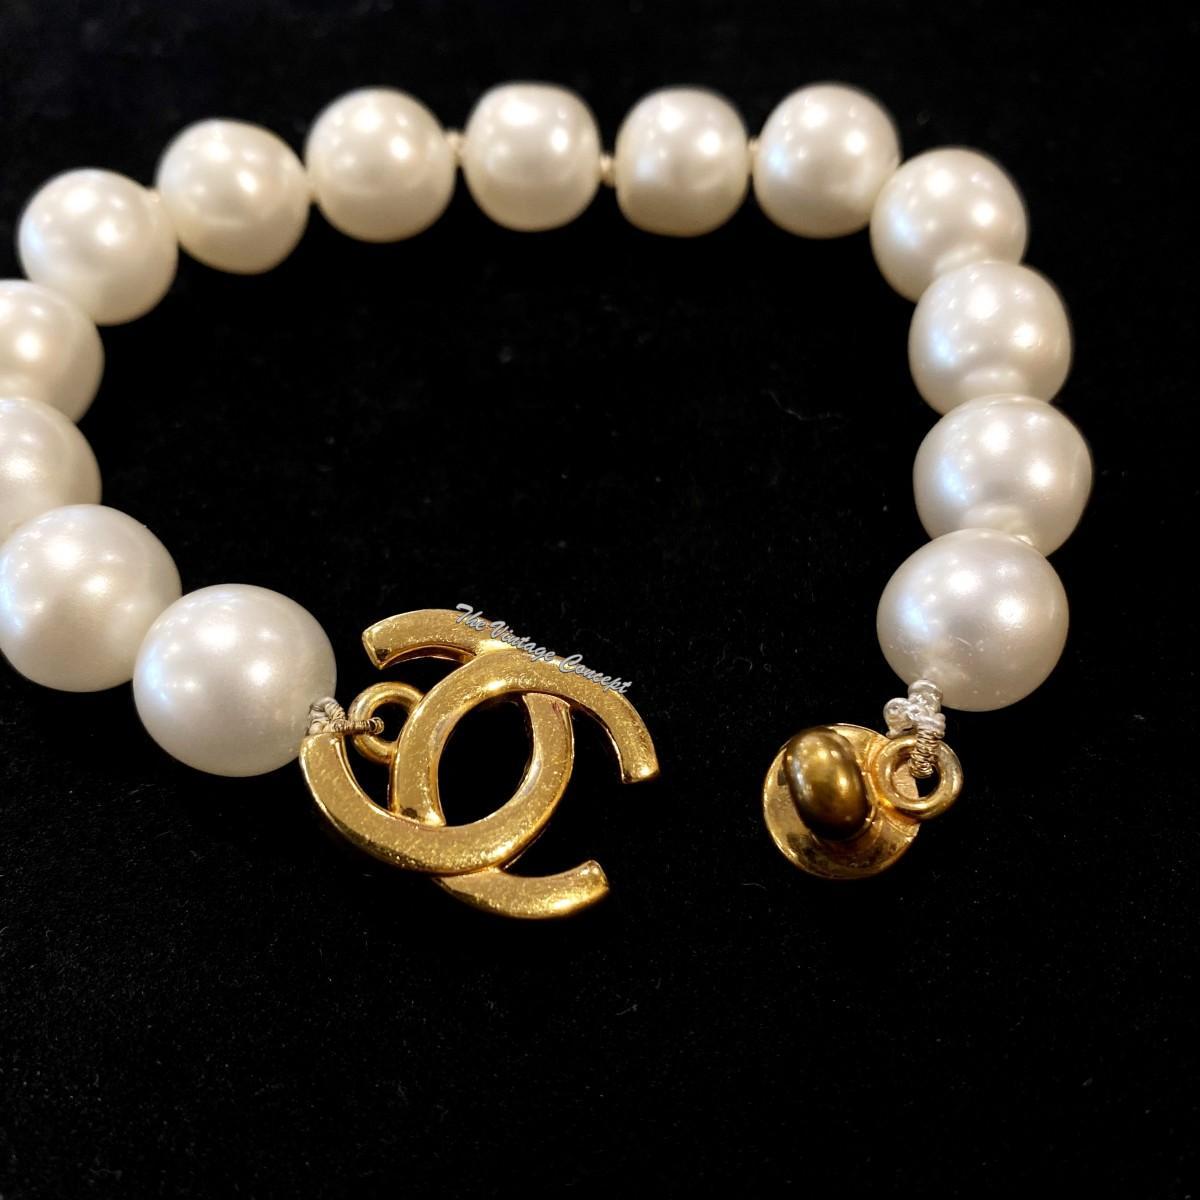 Chanel Pearl Bracelet with CC Logo  Rent Chanel jewelry for 45month